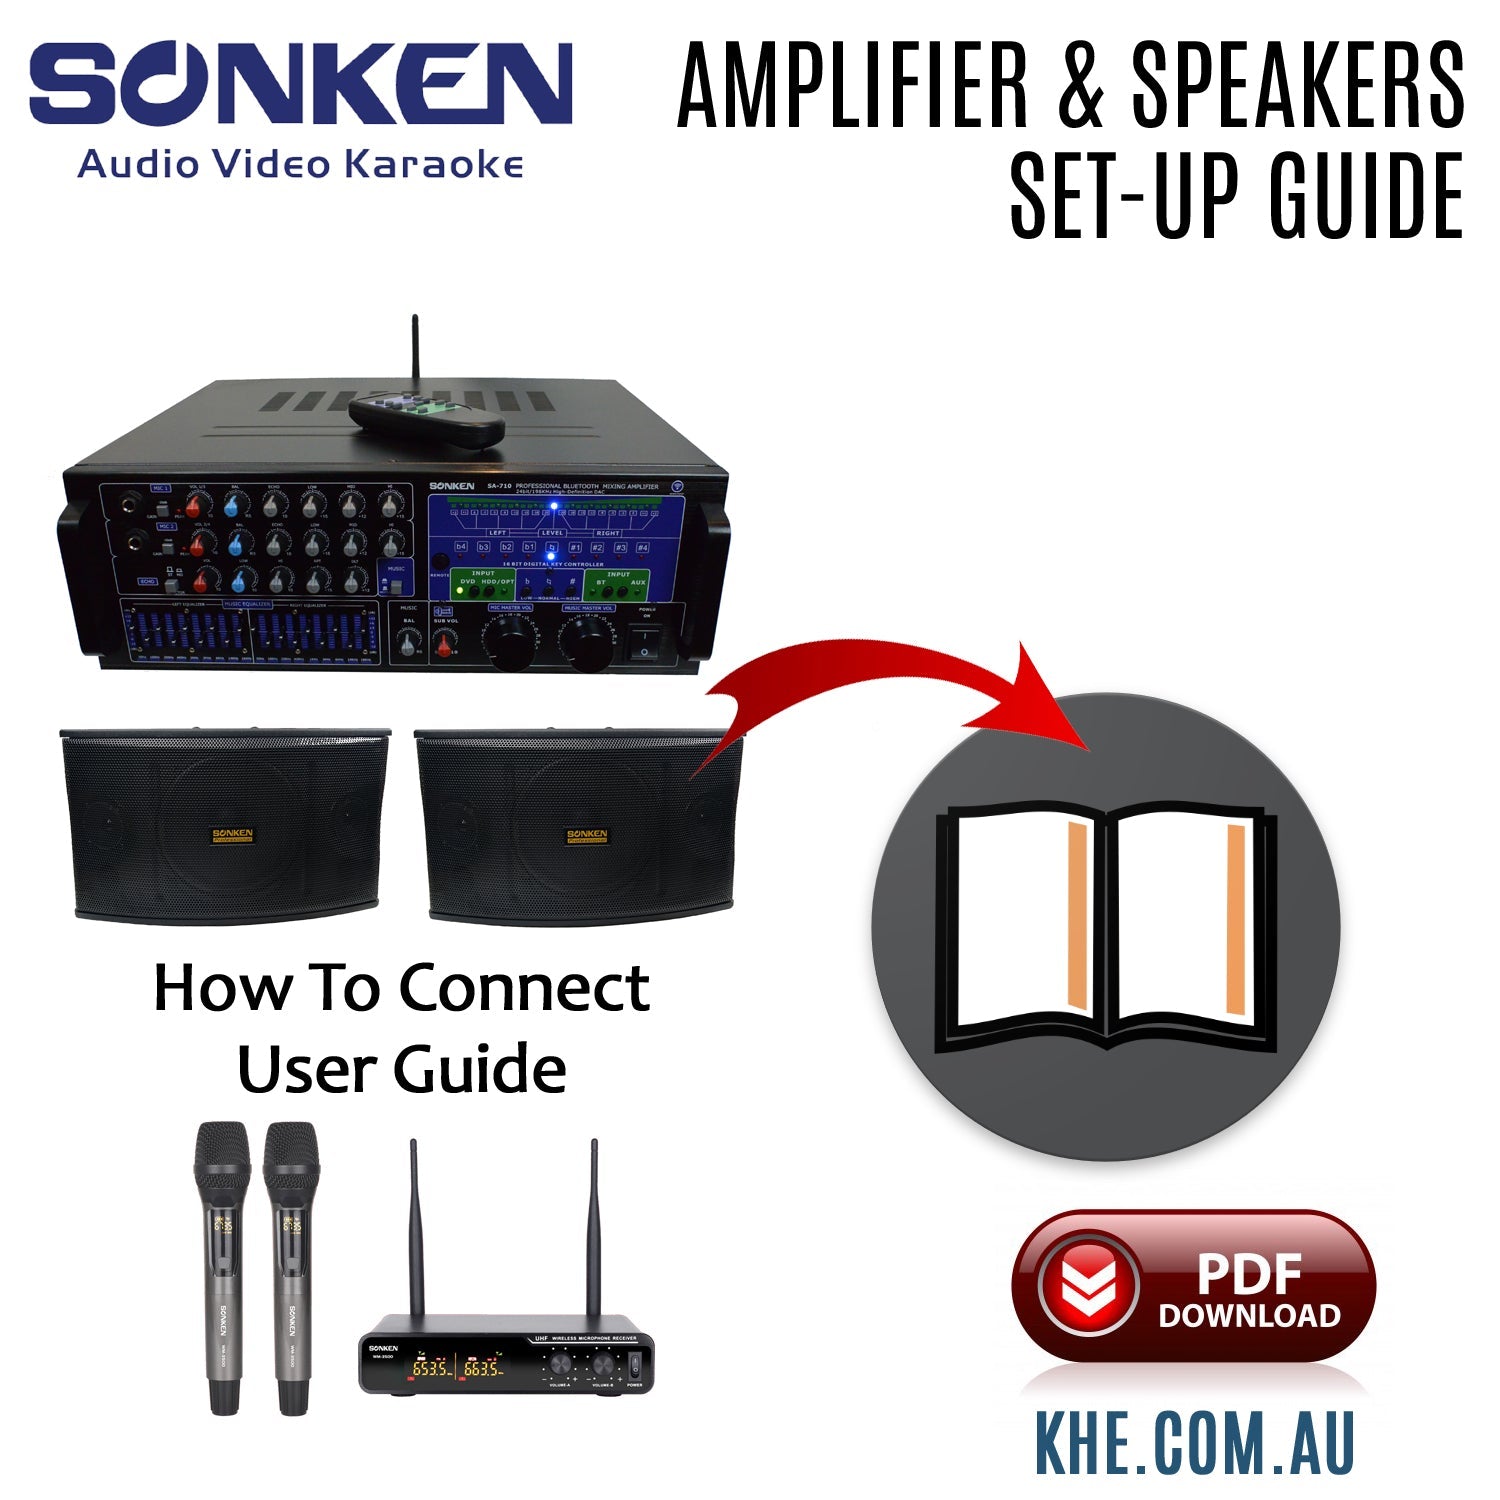 How To Connect Guide - Sonken Amplifier and Speakers - Karaoke Home Entertainment